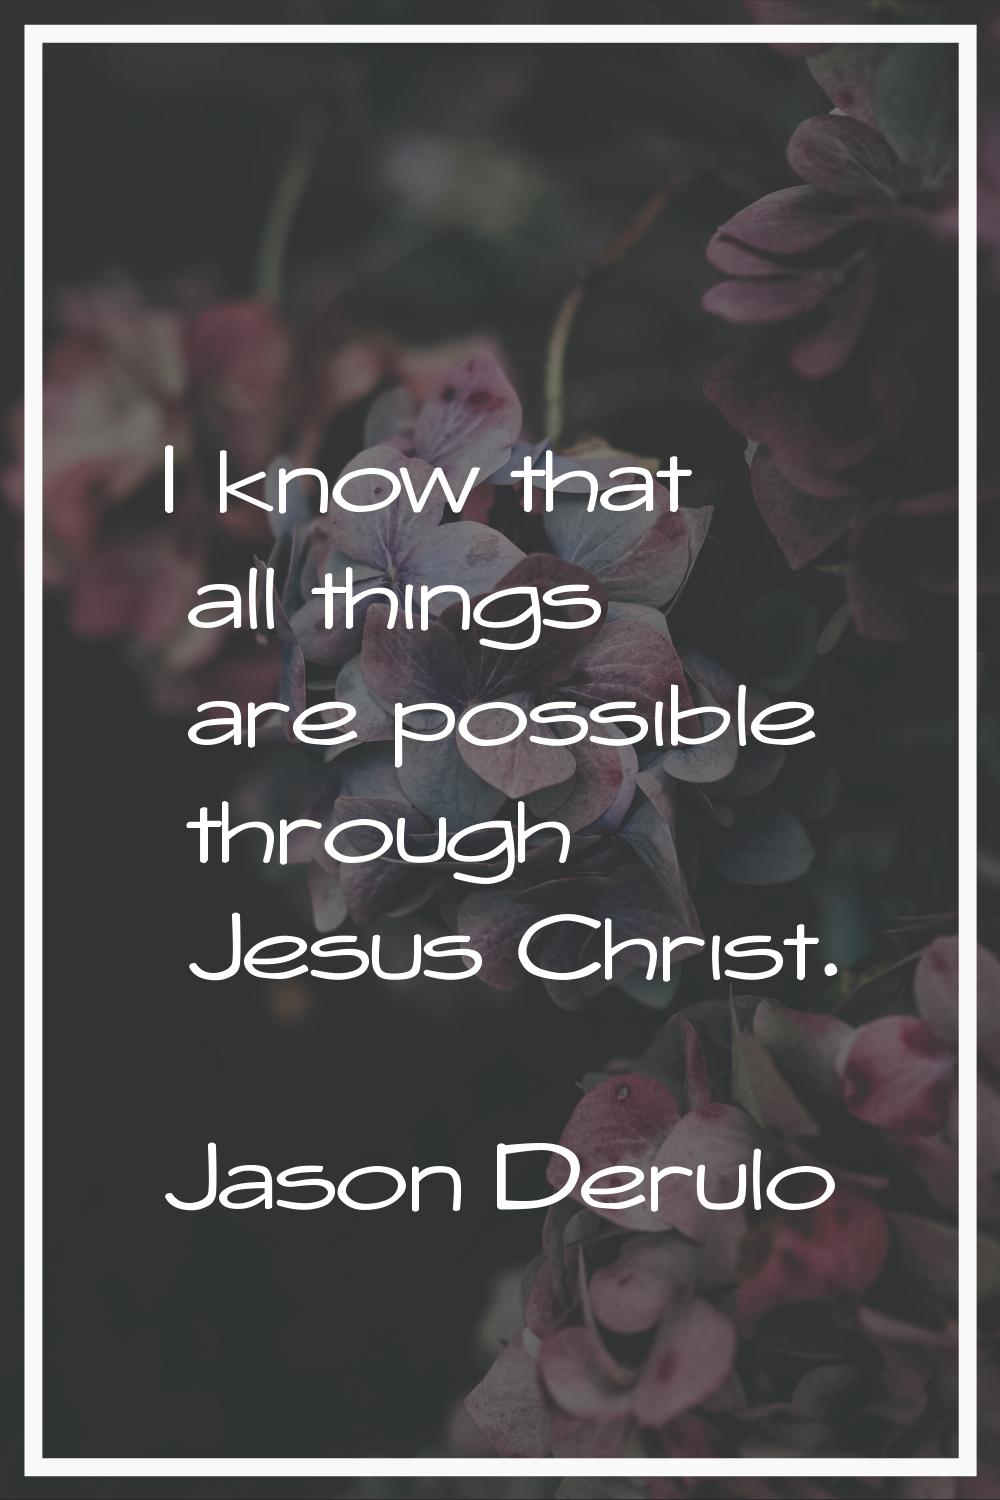 I know that all things are possible through Jesus Christ.